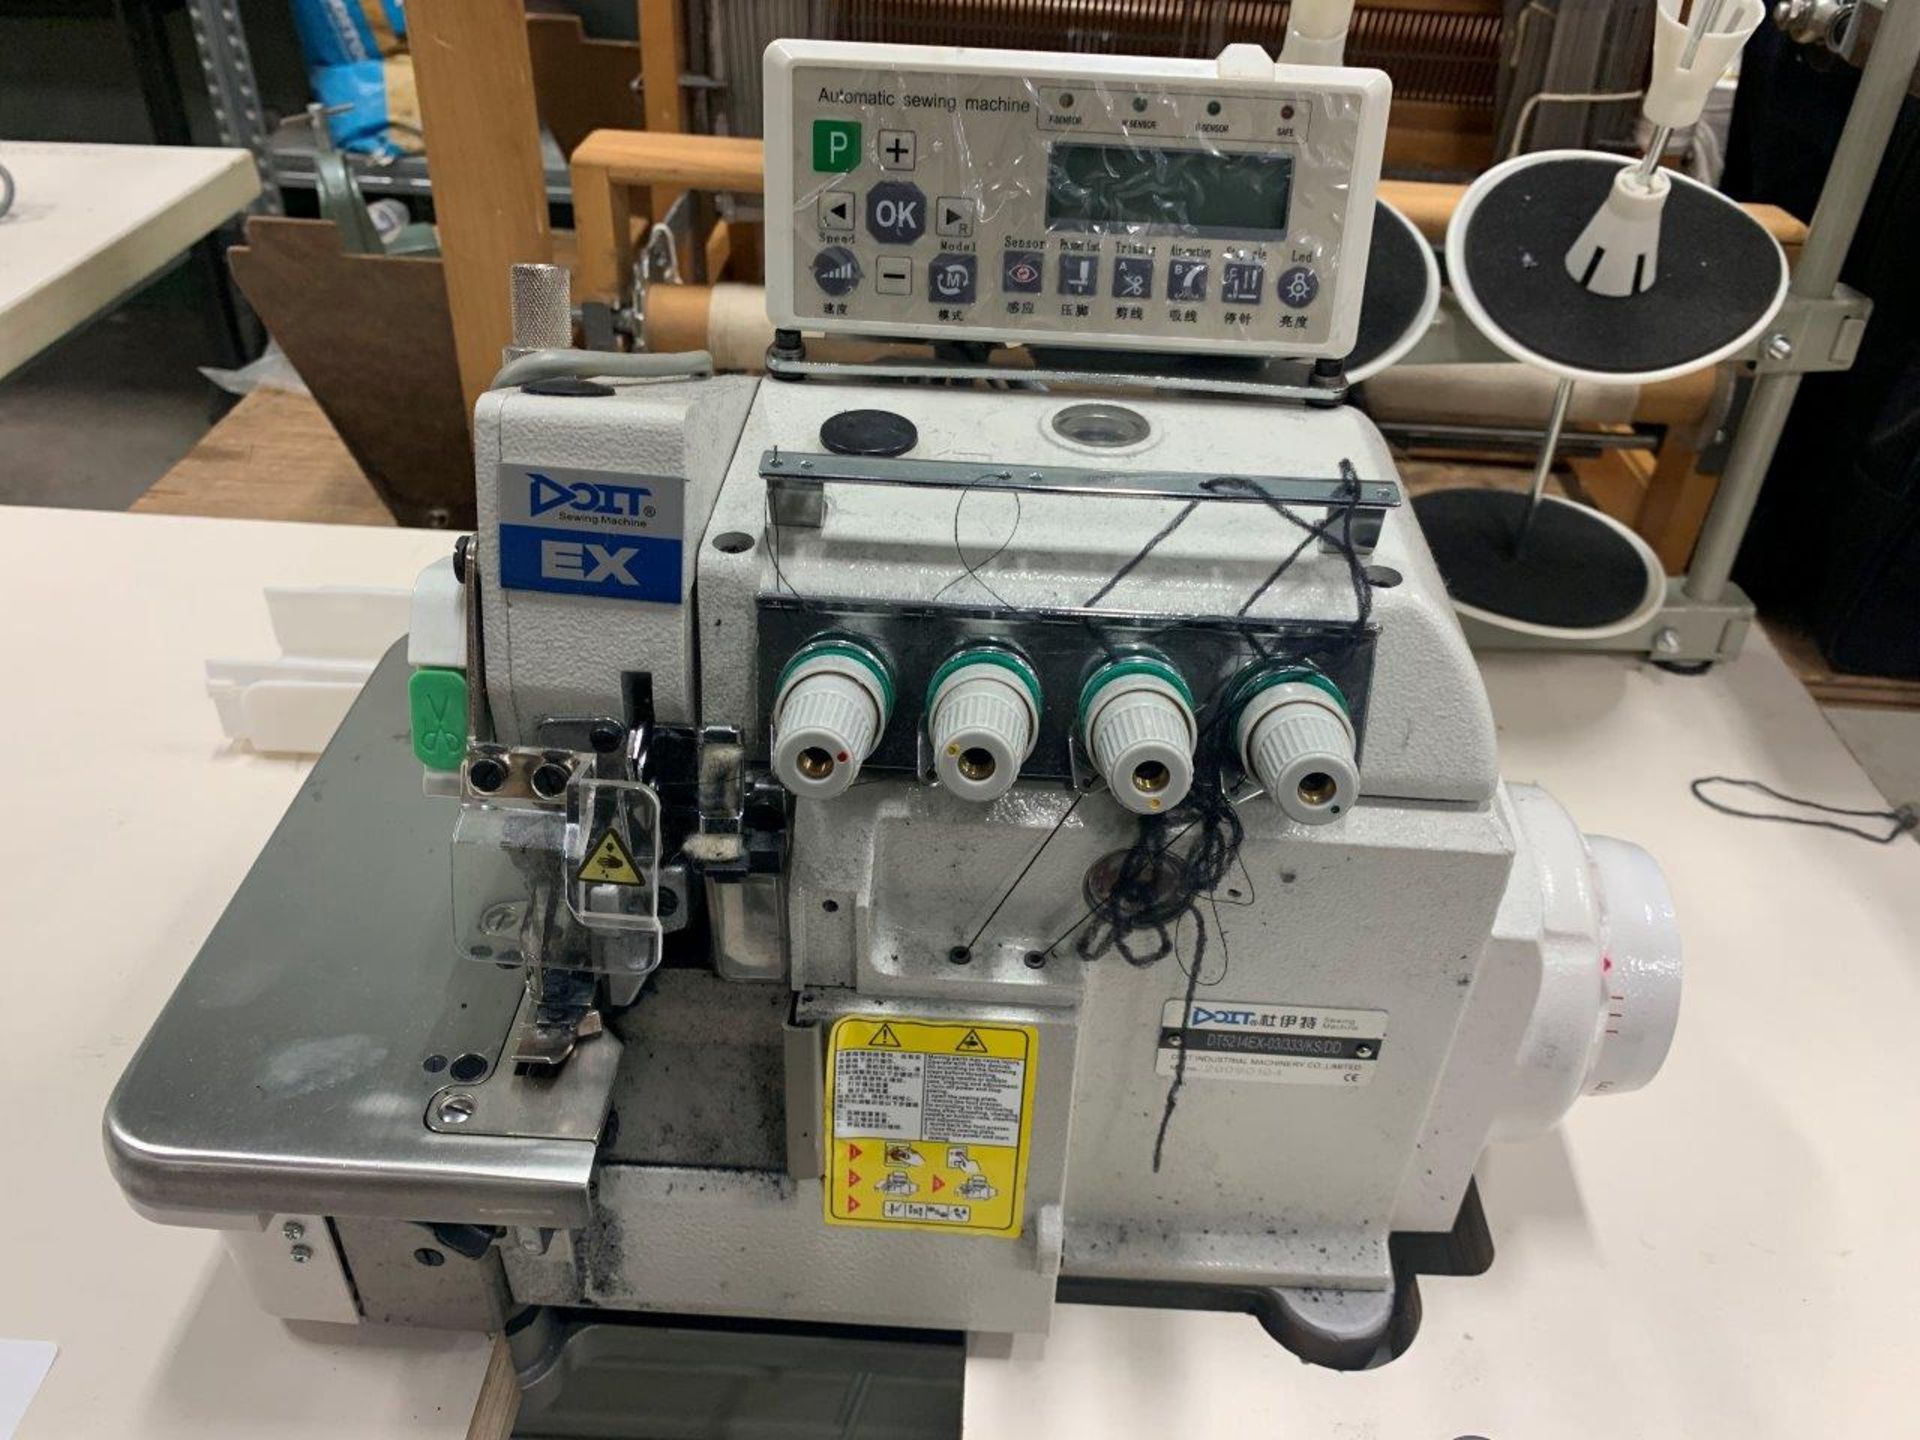 DOIT EX AUTOMATIC SEWING MACHINE W/ TABLE, FOOT PEDALS, MOTOR, S/N DT5214EX-03/333/KS/DD - Image 3 of 8